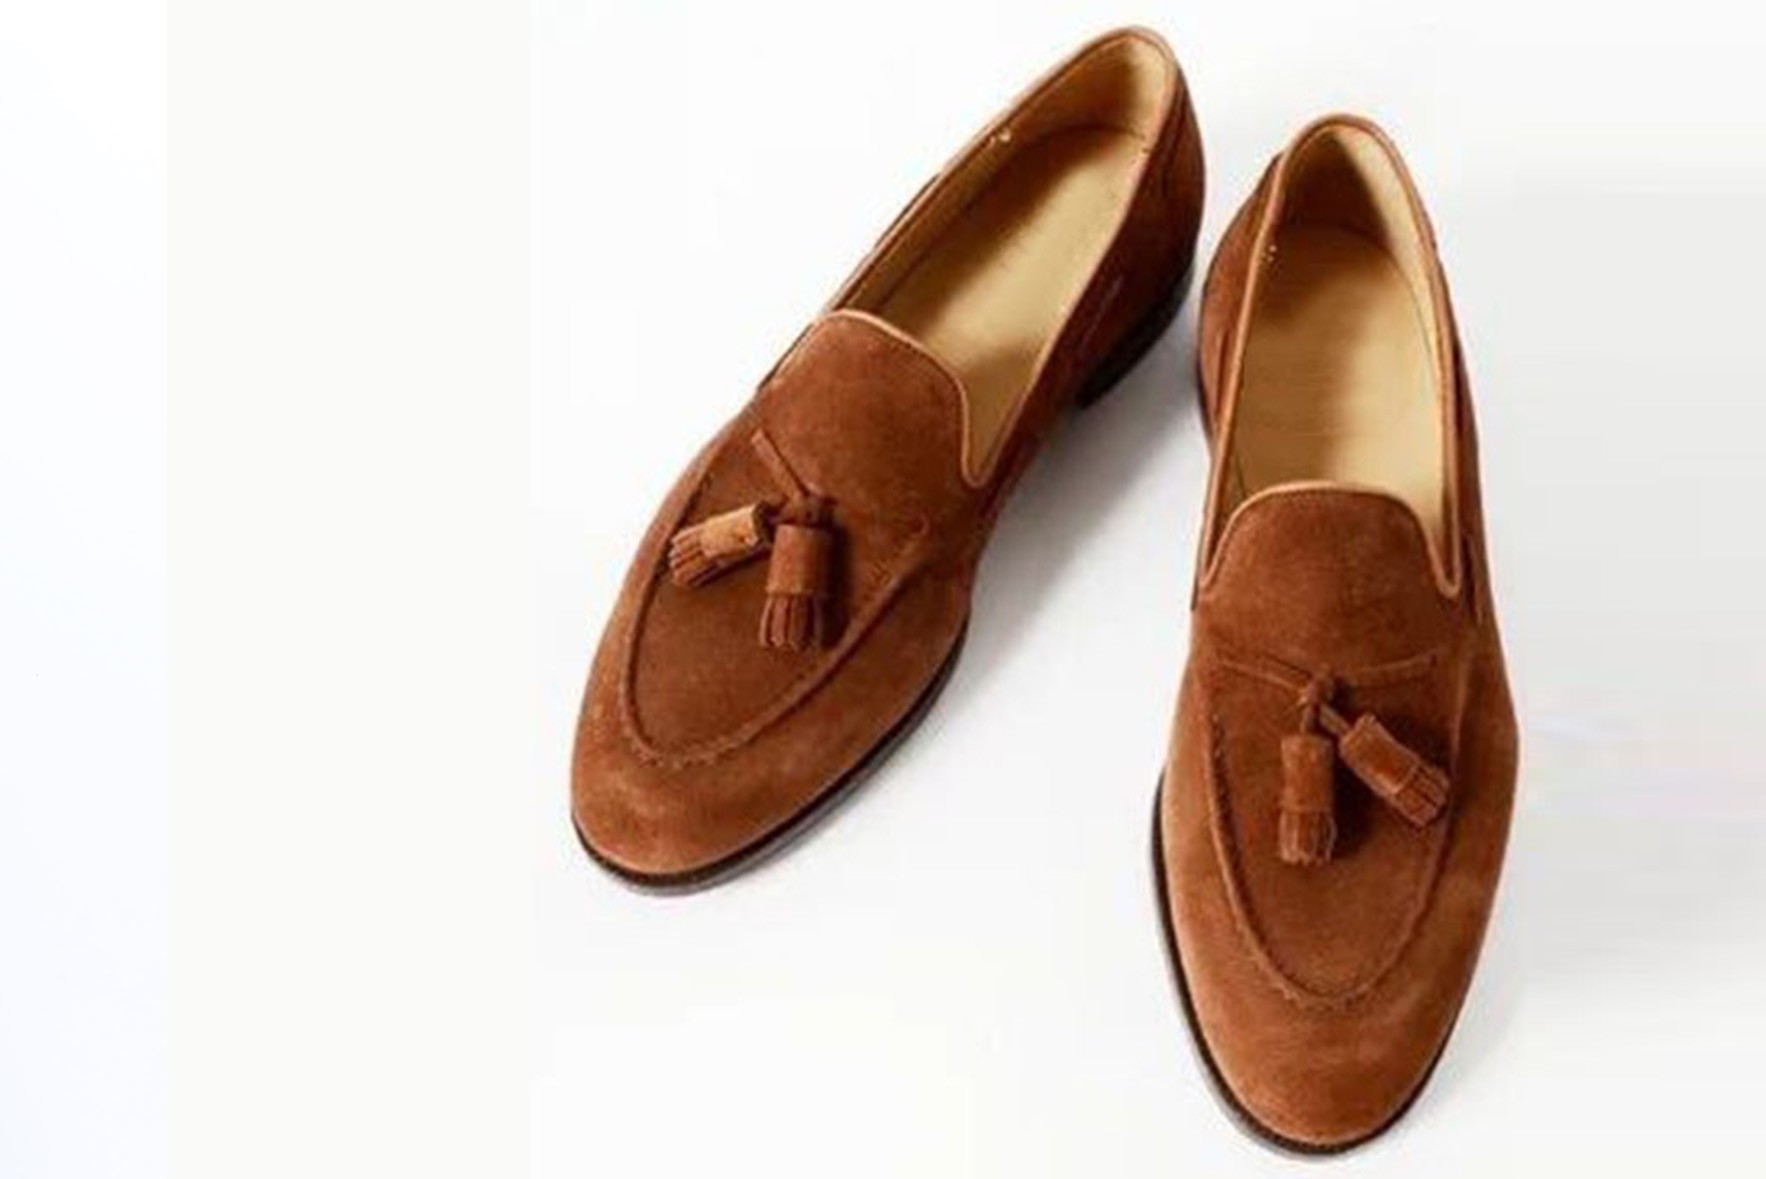 Tassel up loafers - Street Style Store